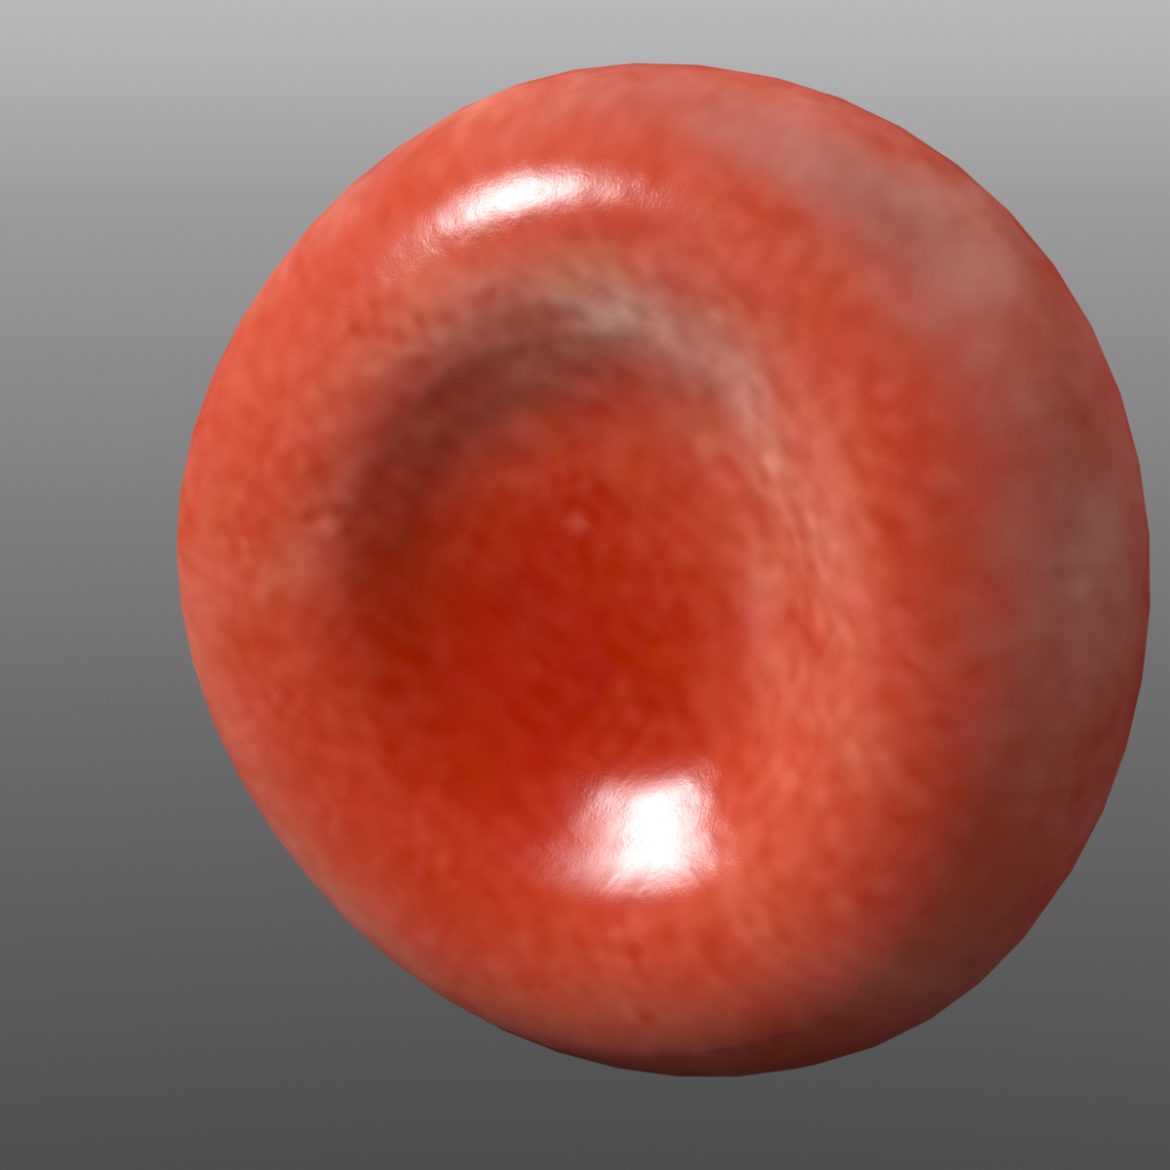  <a class="continue" href="https://www.flatpyramid.com/3d-models/medical-3d-models/anatomy/blood-cell/">Continue Reading<span> Blood Cell</span></a>